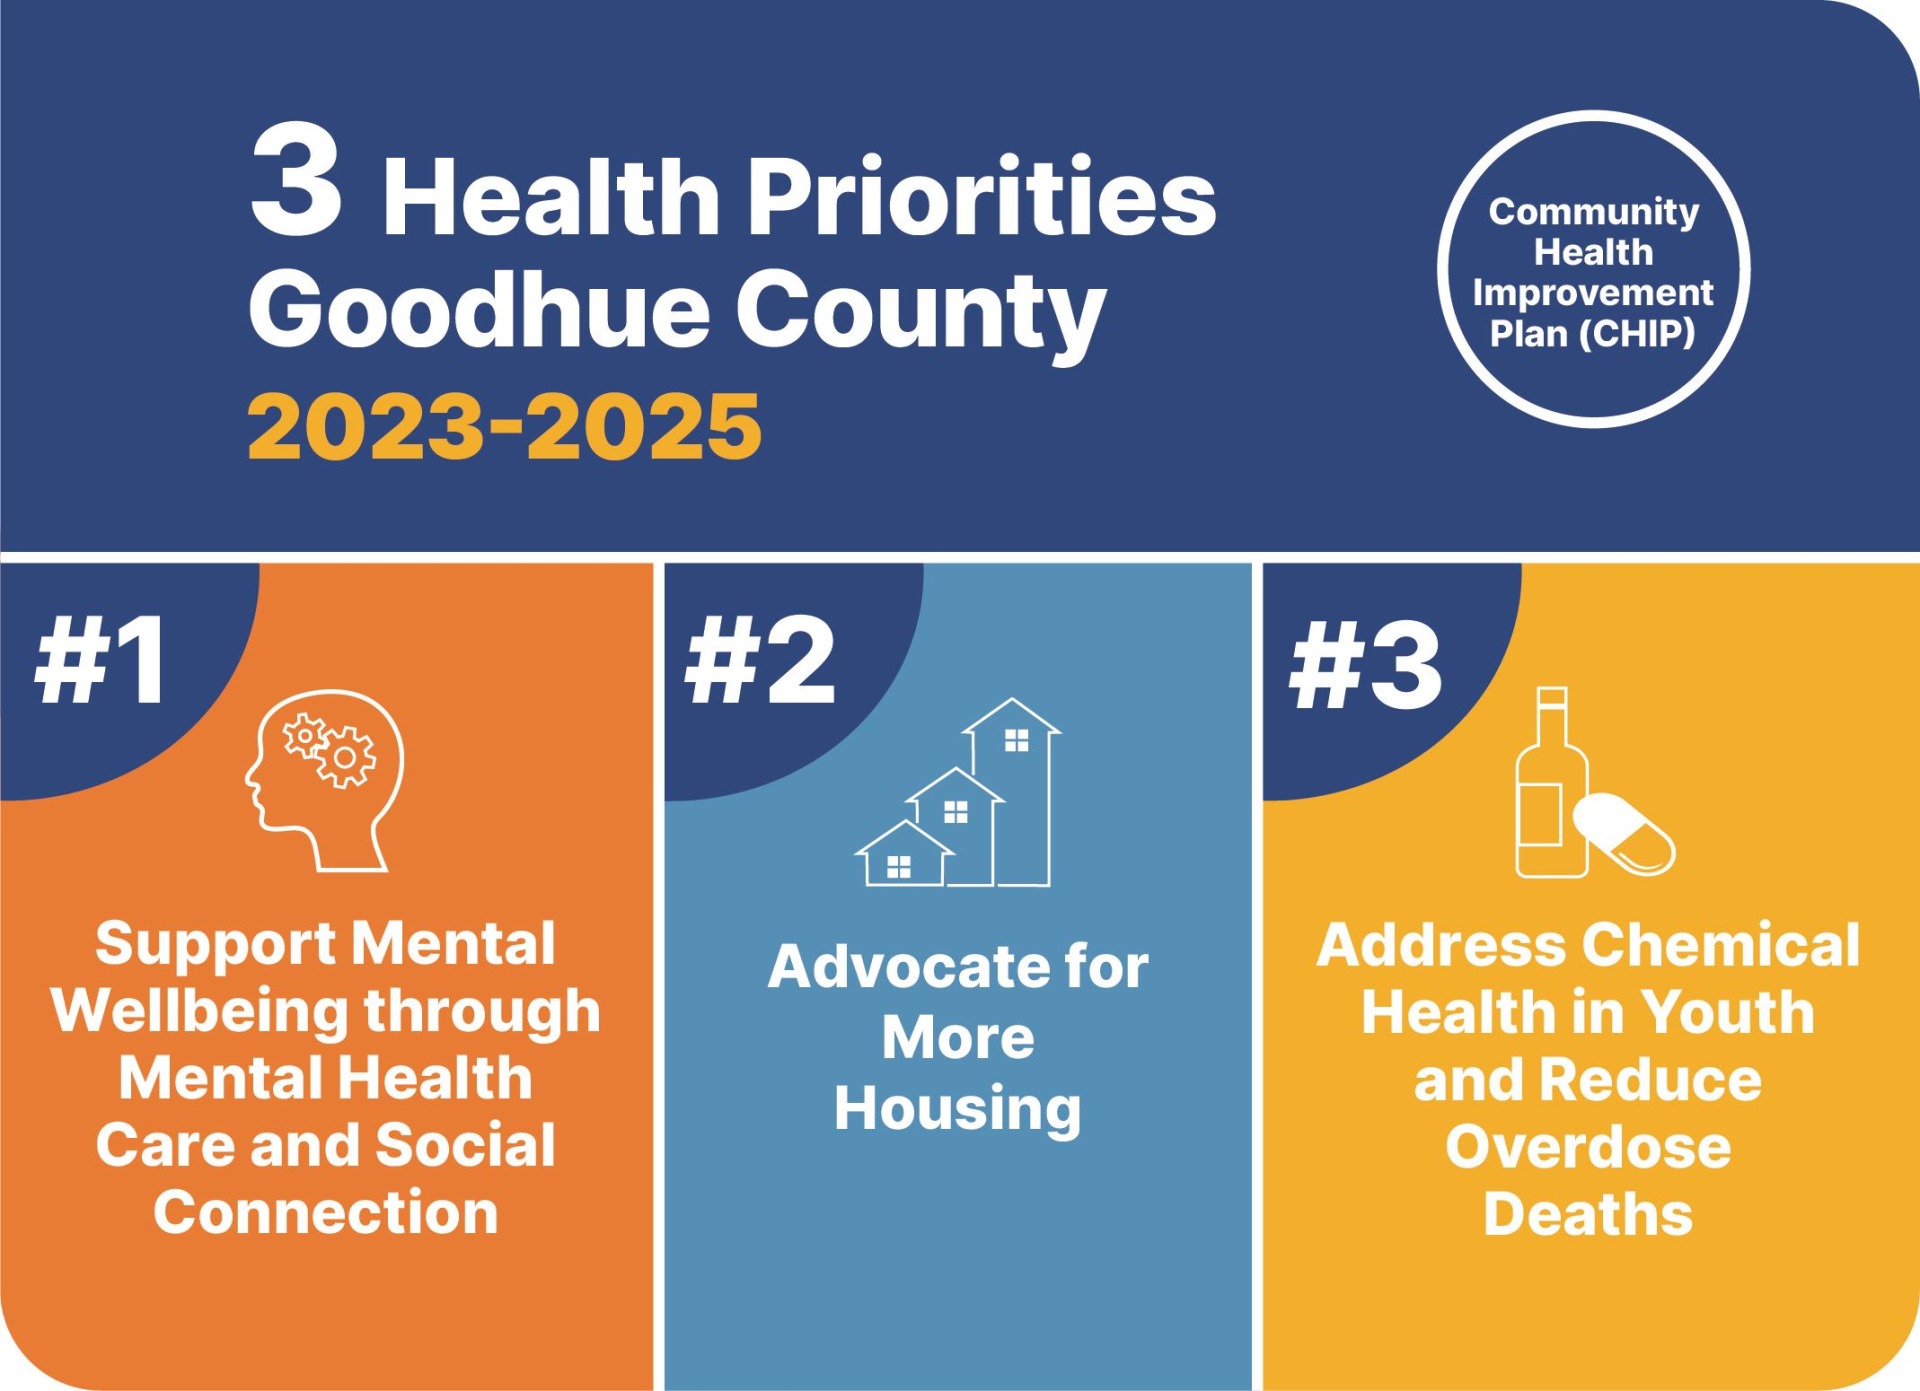 3 Health Priorities for Goodhue County & Action Plans